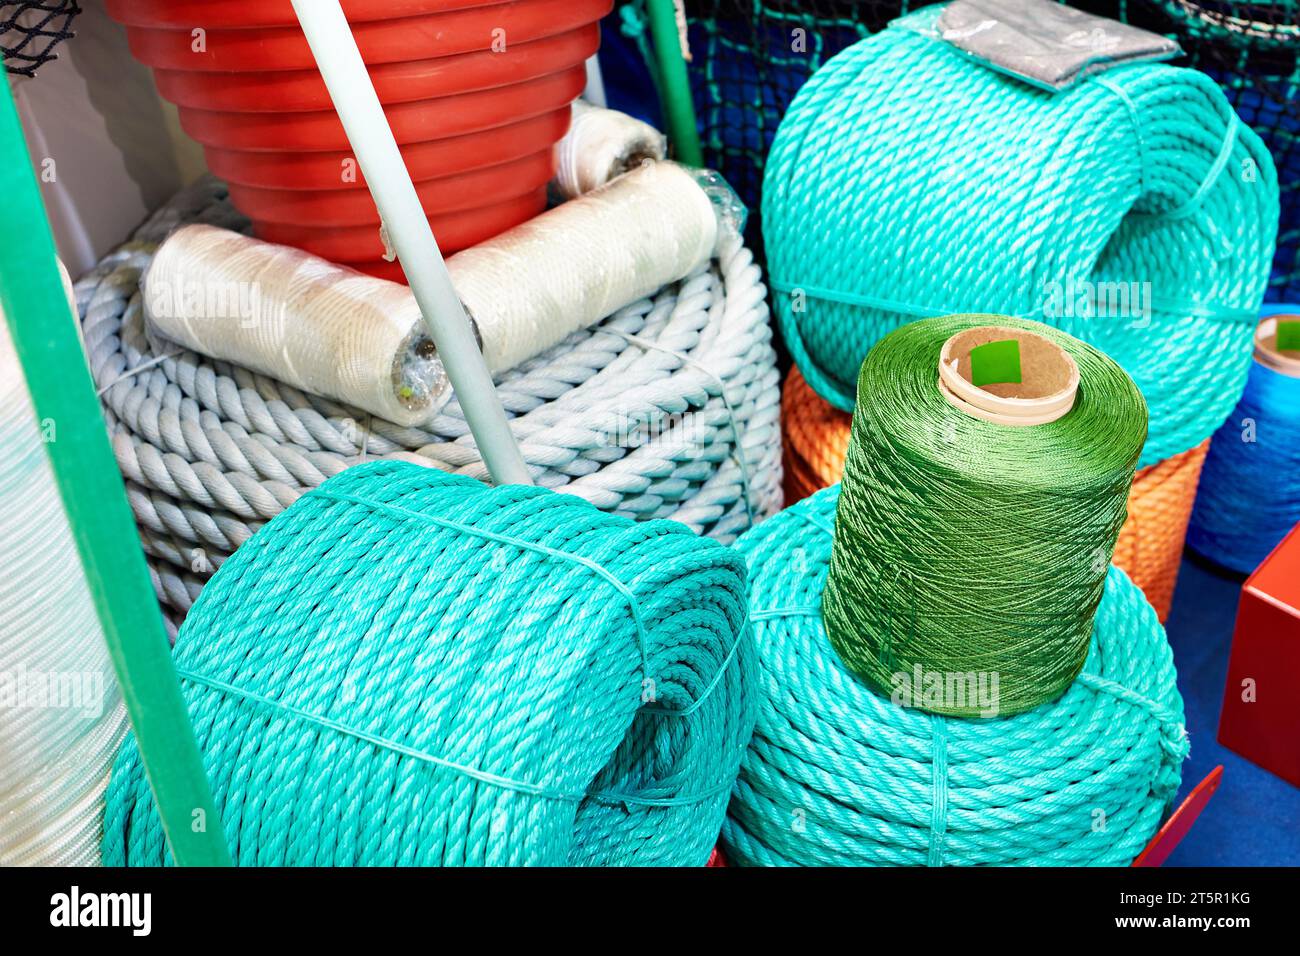 https://c8.alamy.com/comp/2T5R1KG/fishing-ropes-in-the-shop-2T5R1KG.jpg